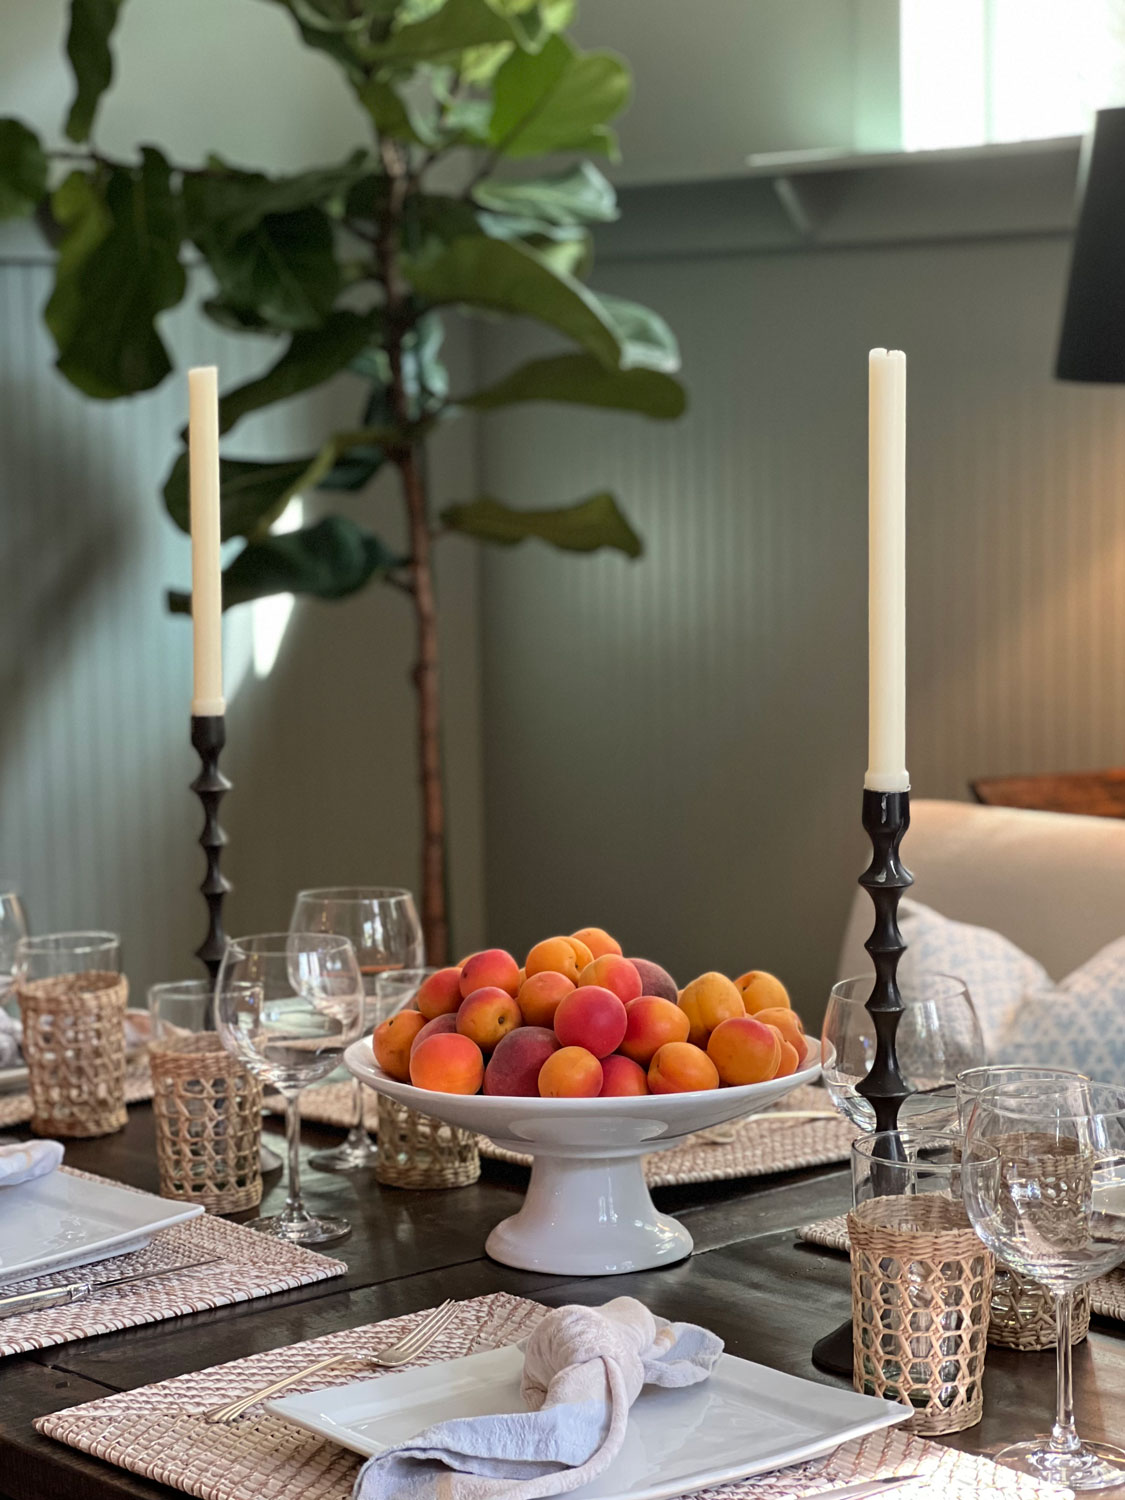 Dinner Party Ideas With Peaches and Sherwin Williams Acacia Haze walls